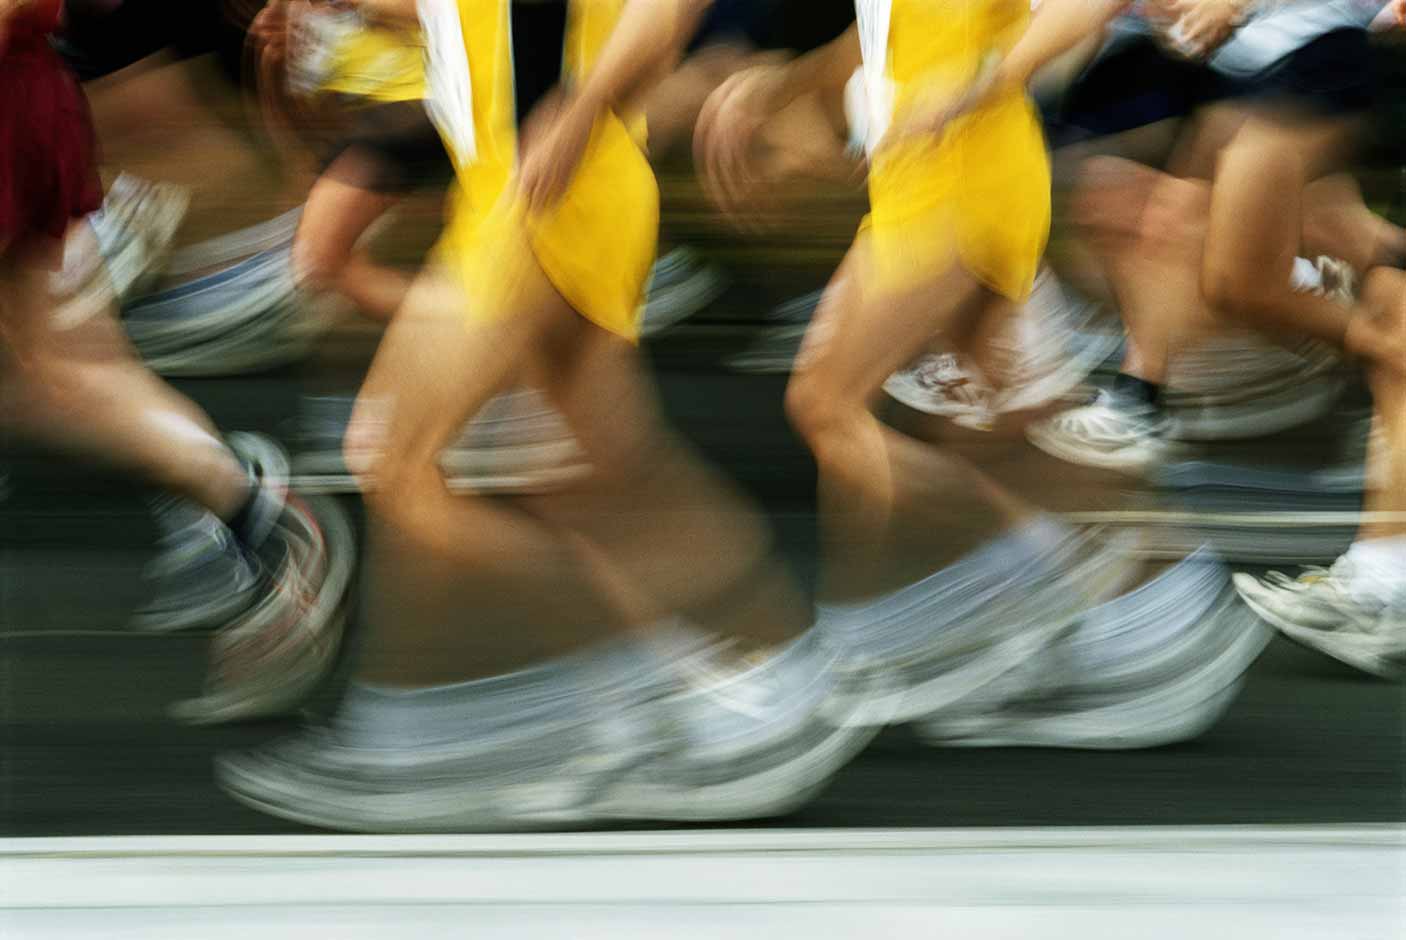 A close-up blurred image of marathon runners